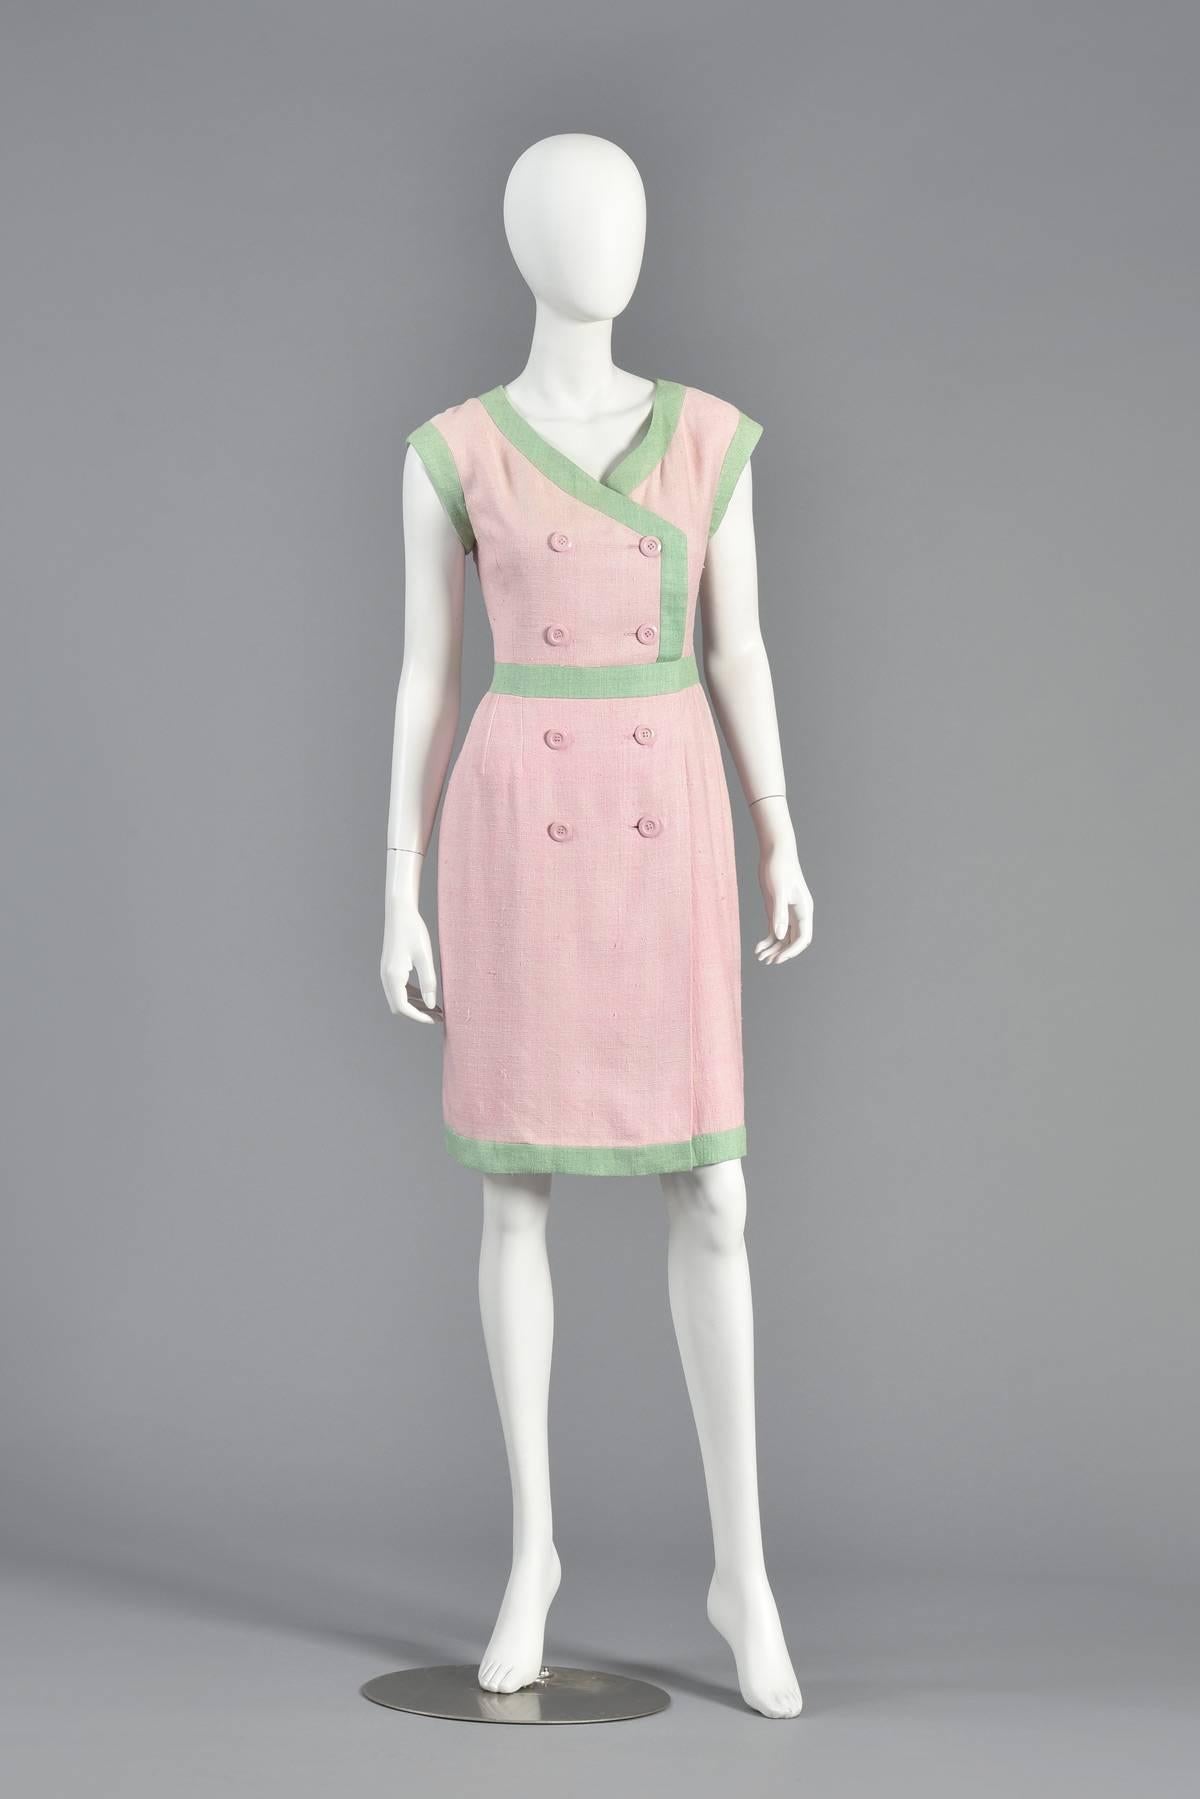 Lovely vintage 1980s pale pink & green linen dress by Valentino. The dress boasts a double breasted fitted bodice with large pink buttons and green trim. Fully lined in silk.

We ESTIMATE this piece to be about a size medium but please refer to